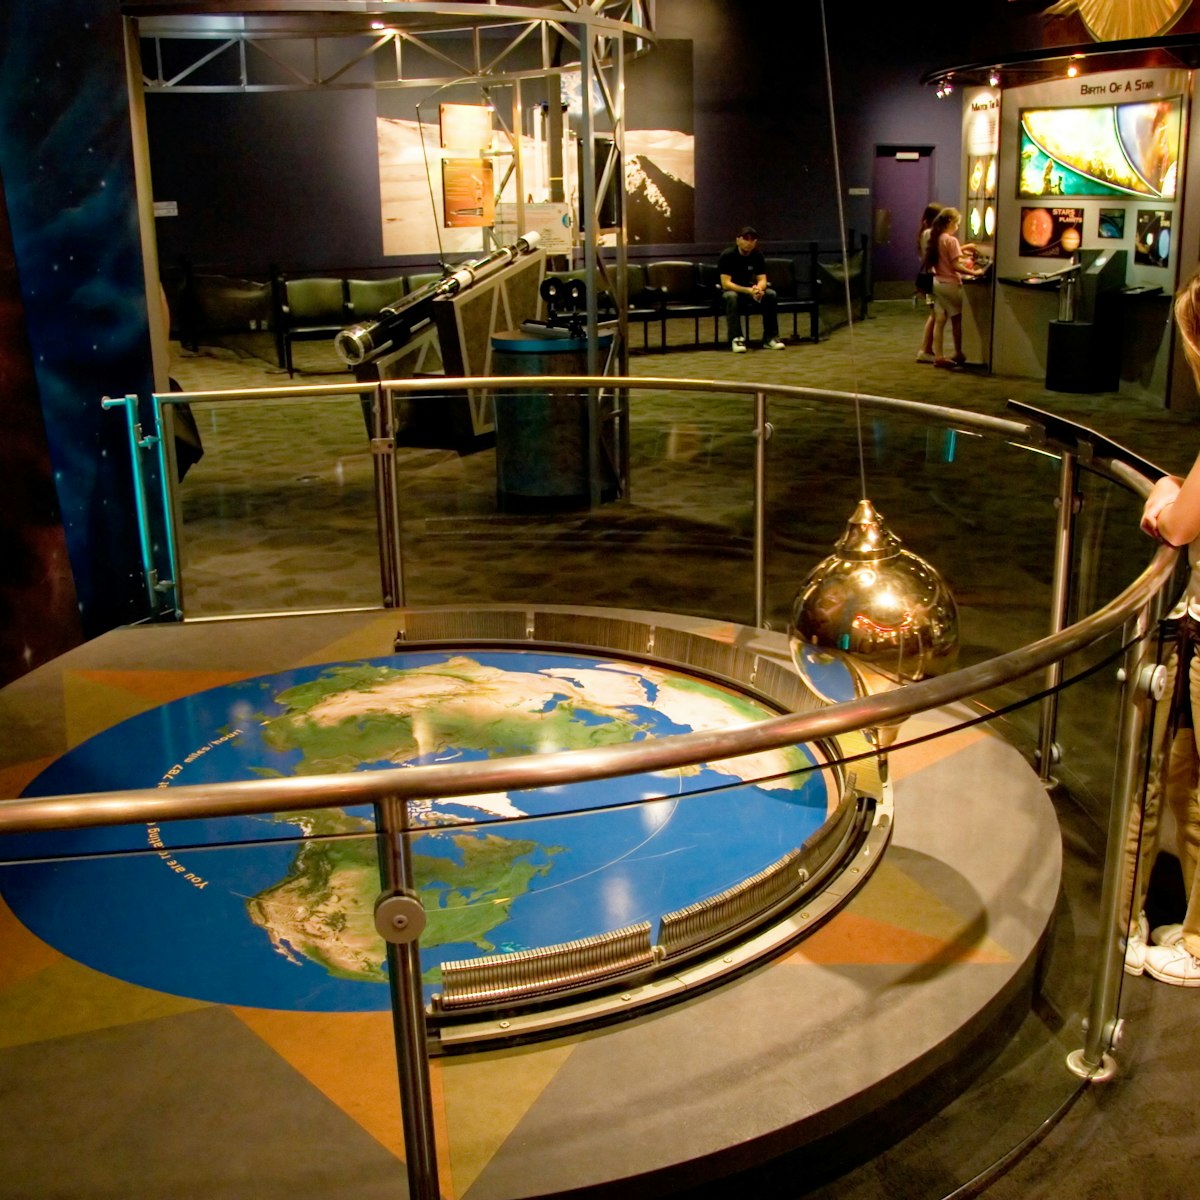 A girl watches the pendulum exhibit at Clark Planetarium at the Gateway Center in downtown Salt Lake City, Utah USA. (Photo by: Universal Images Group via Getty Images)